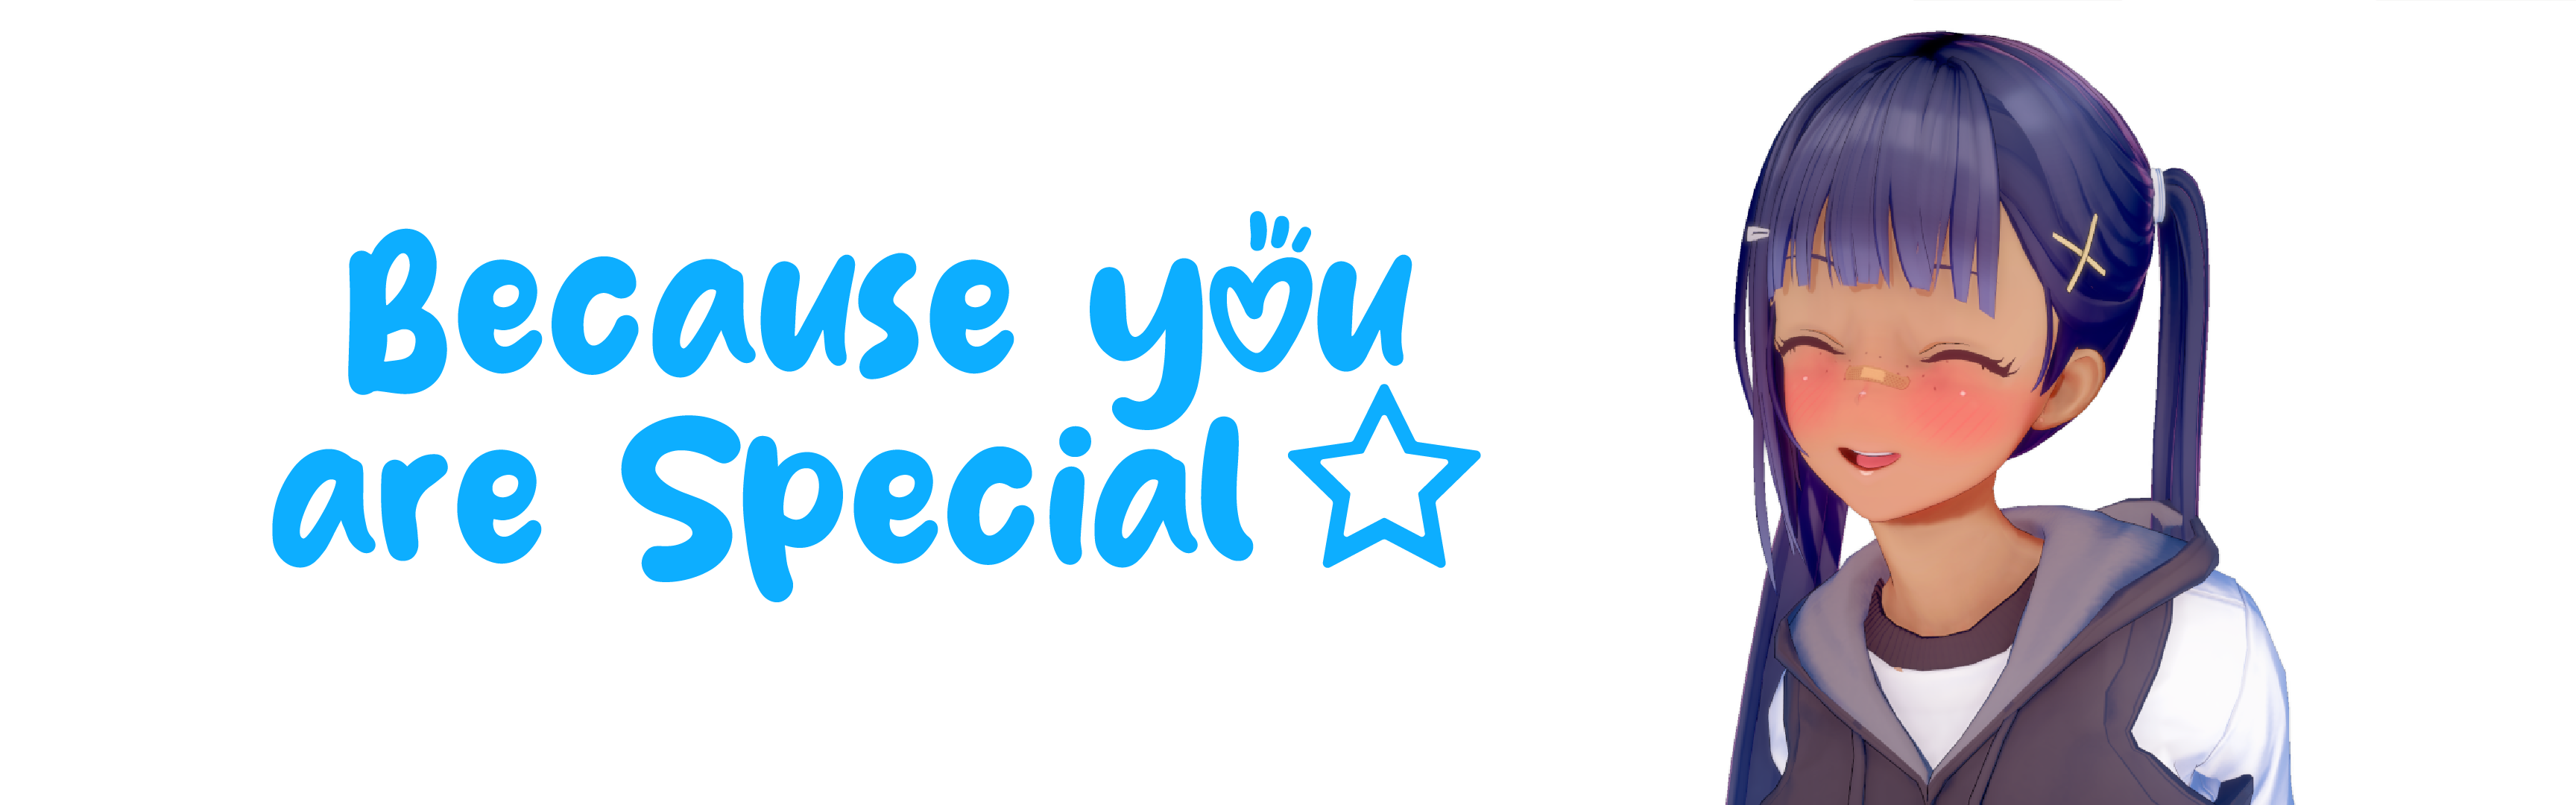 Because you are Special poster